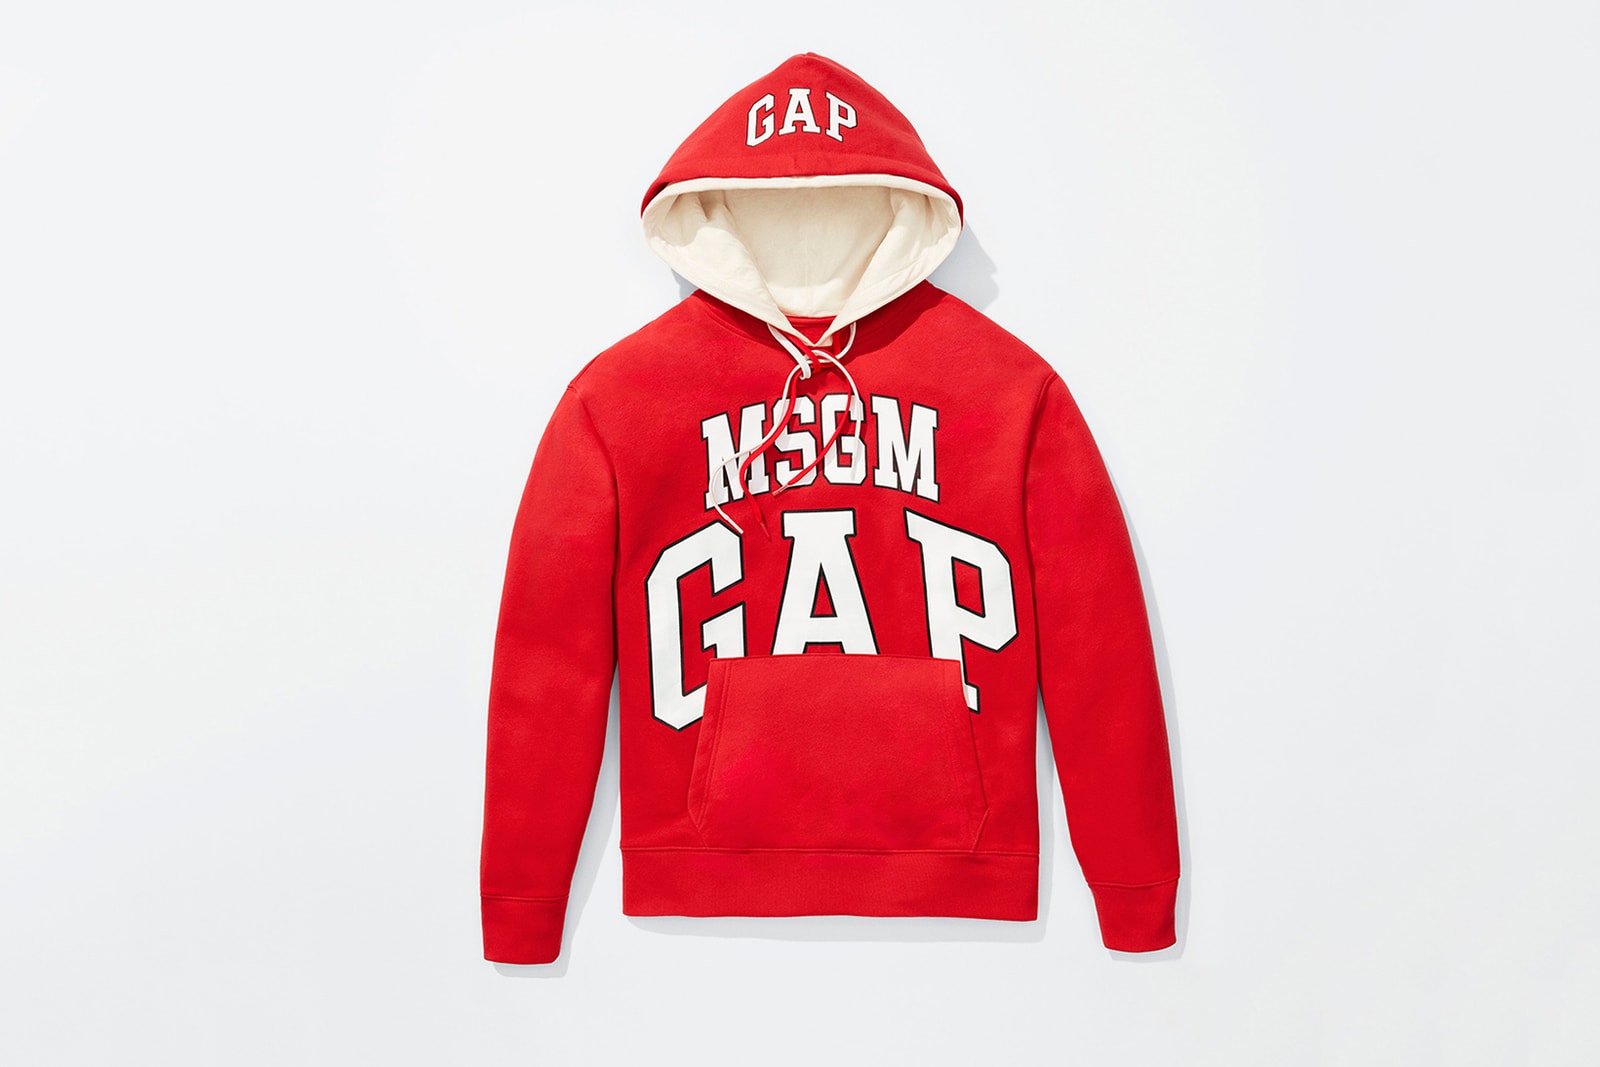 Gap GQ The Coolest Designers on the Planet 2018 Gallery No Vacancy Inn Balmain MSGM Dsquared Opening Ceremony logo sweatshirt hoodie